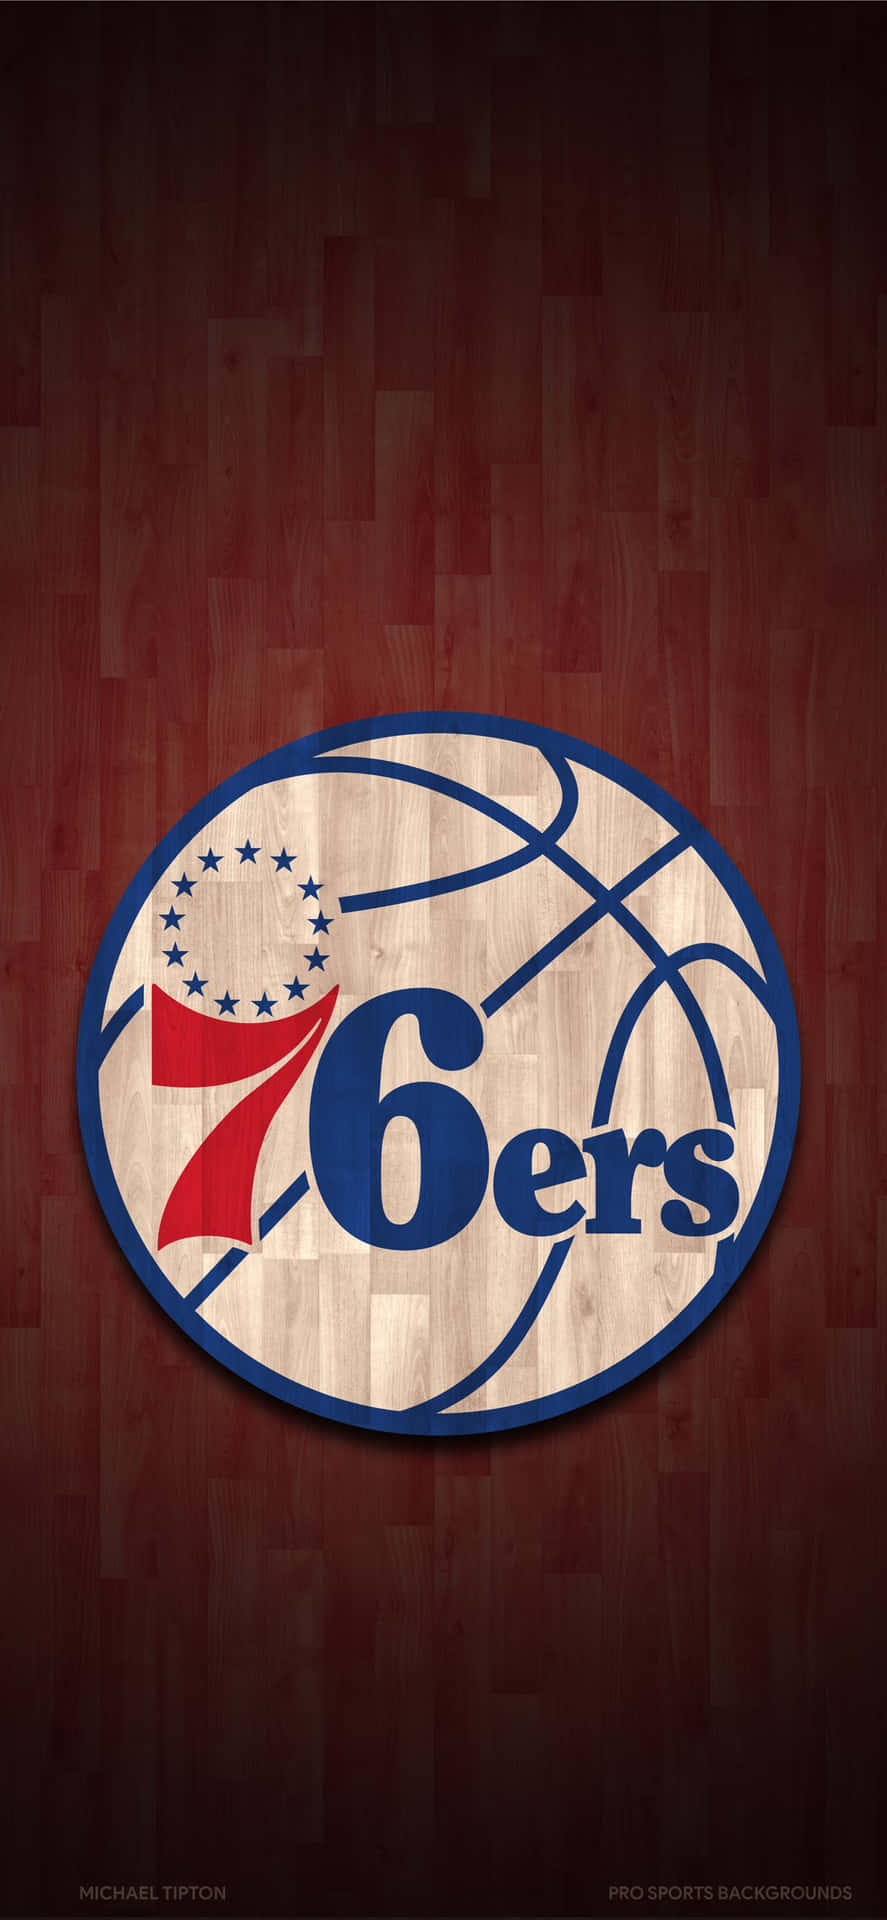 Catch all the action of your favorite NBA team with the official Sixers Iphone! Wallpaper